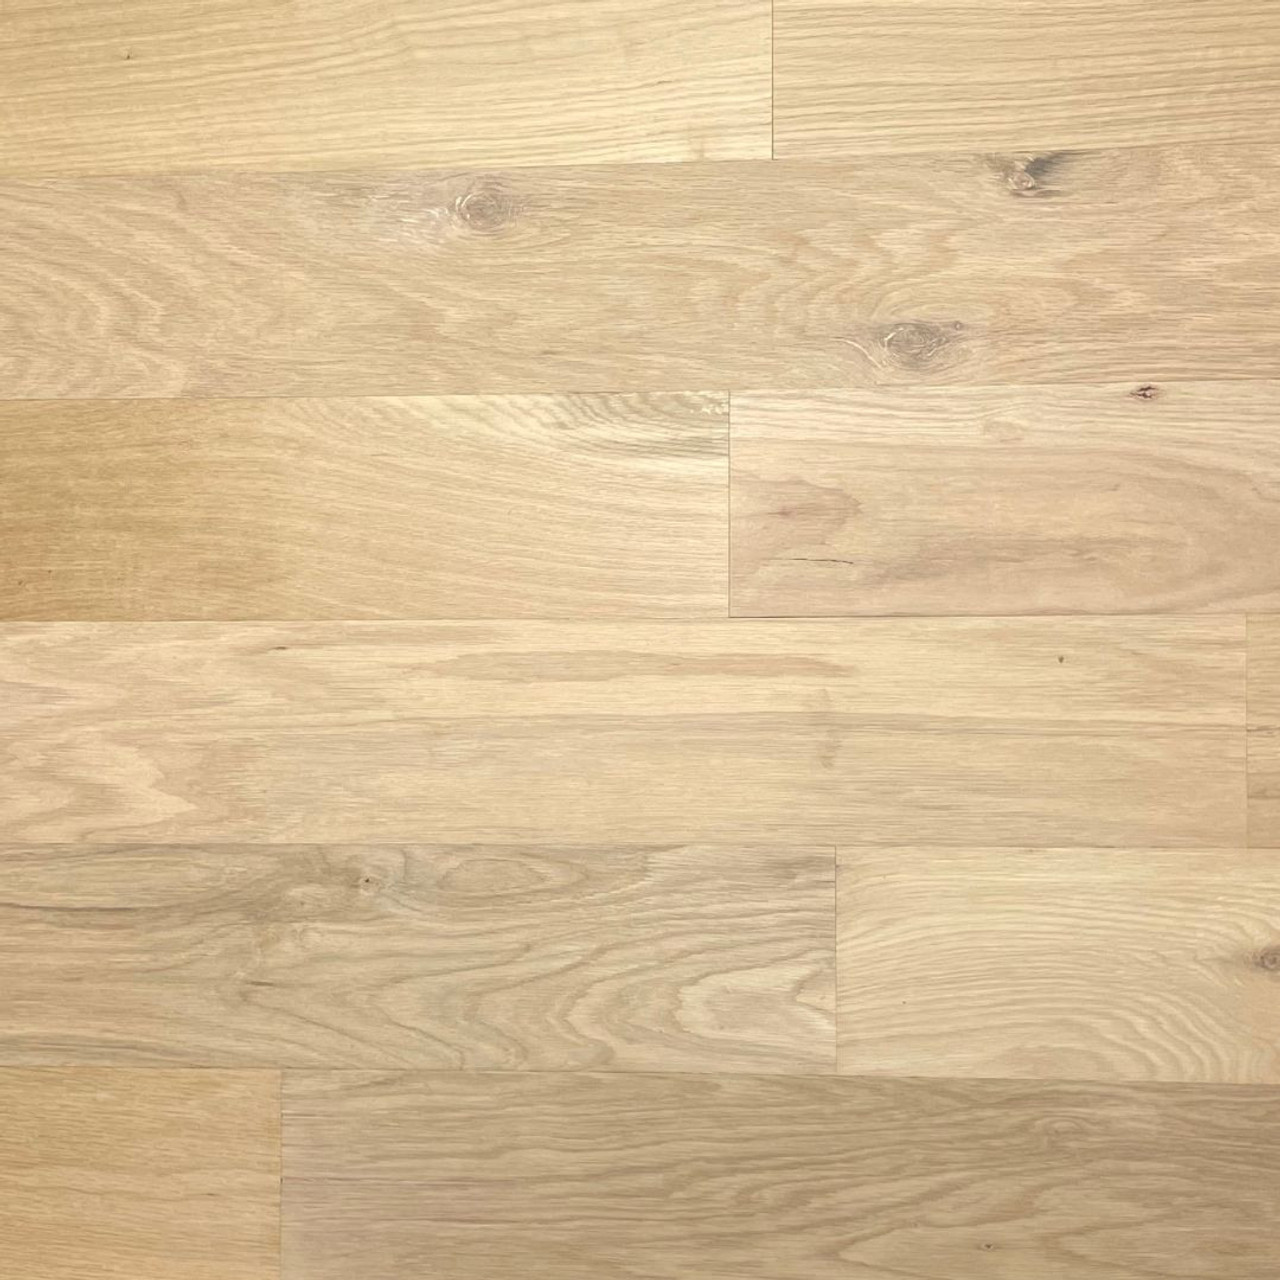 Hapwood White Oak 3/8" 3-ply Mill Crafted Hardwood Flooring (Not Eligible For Free Shipping)